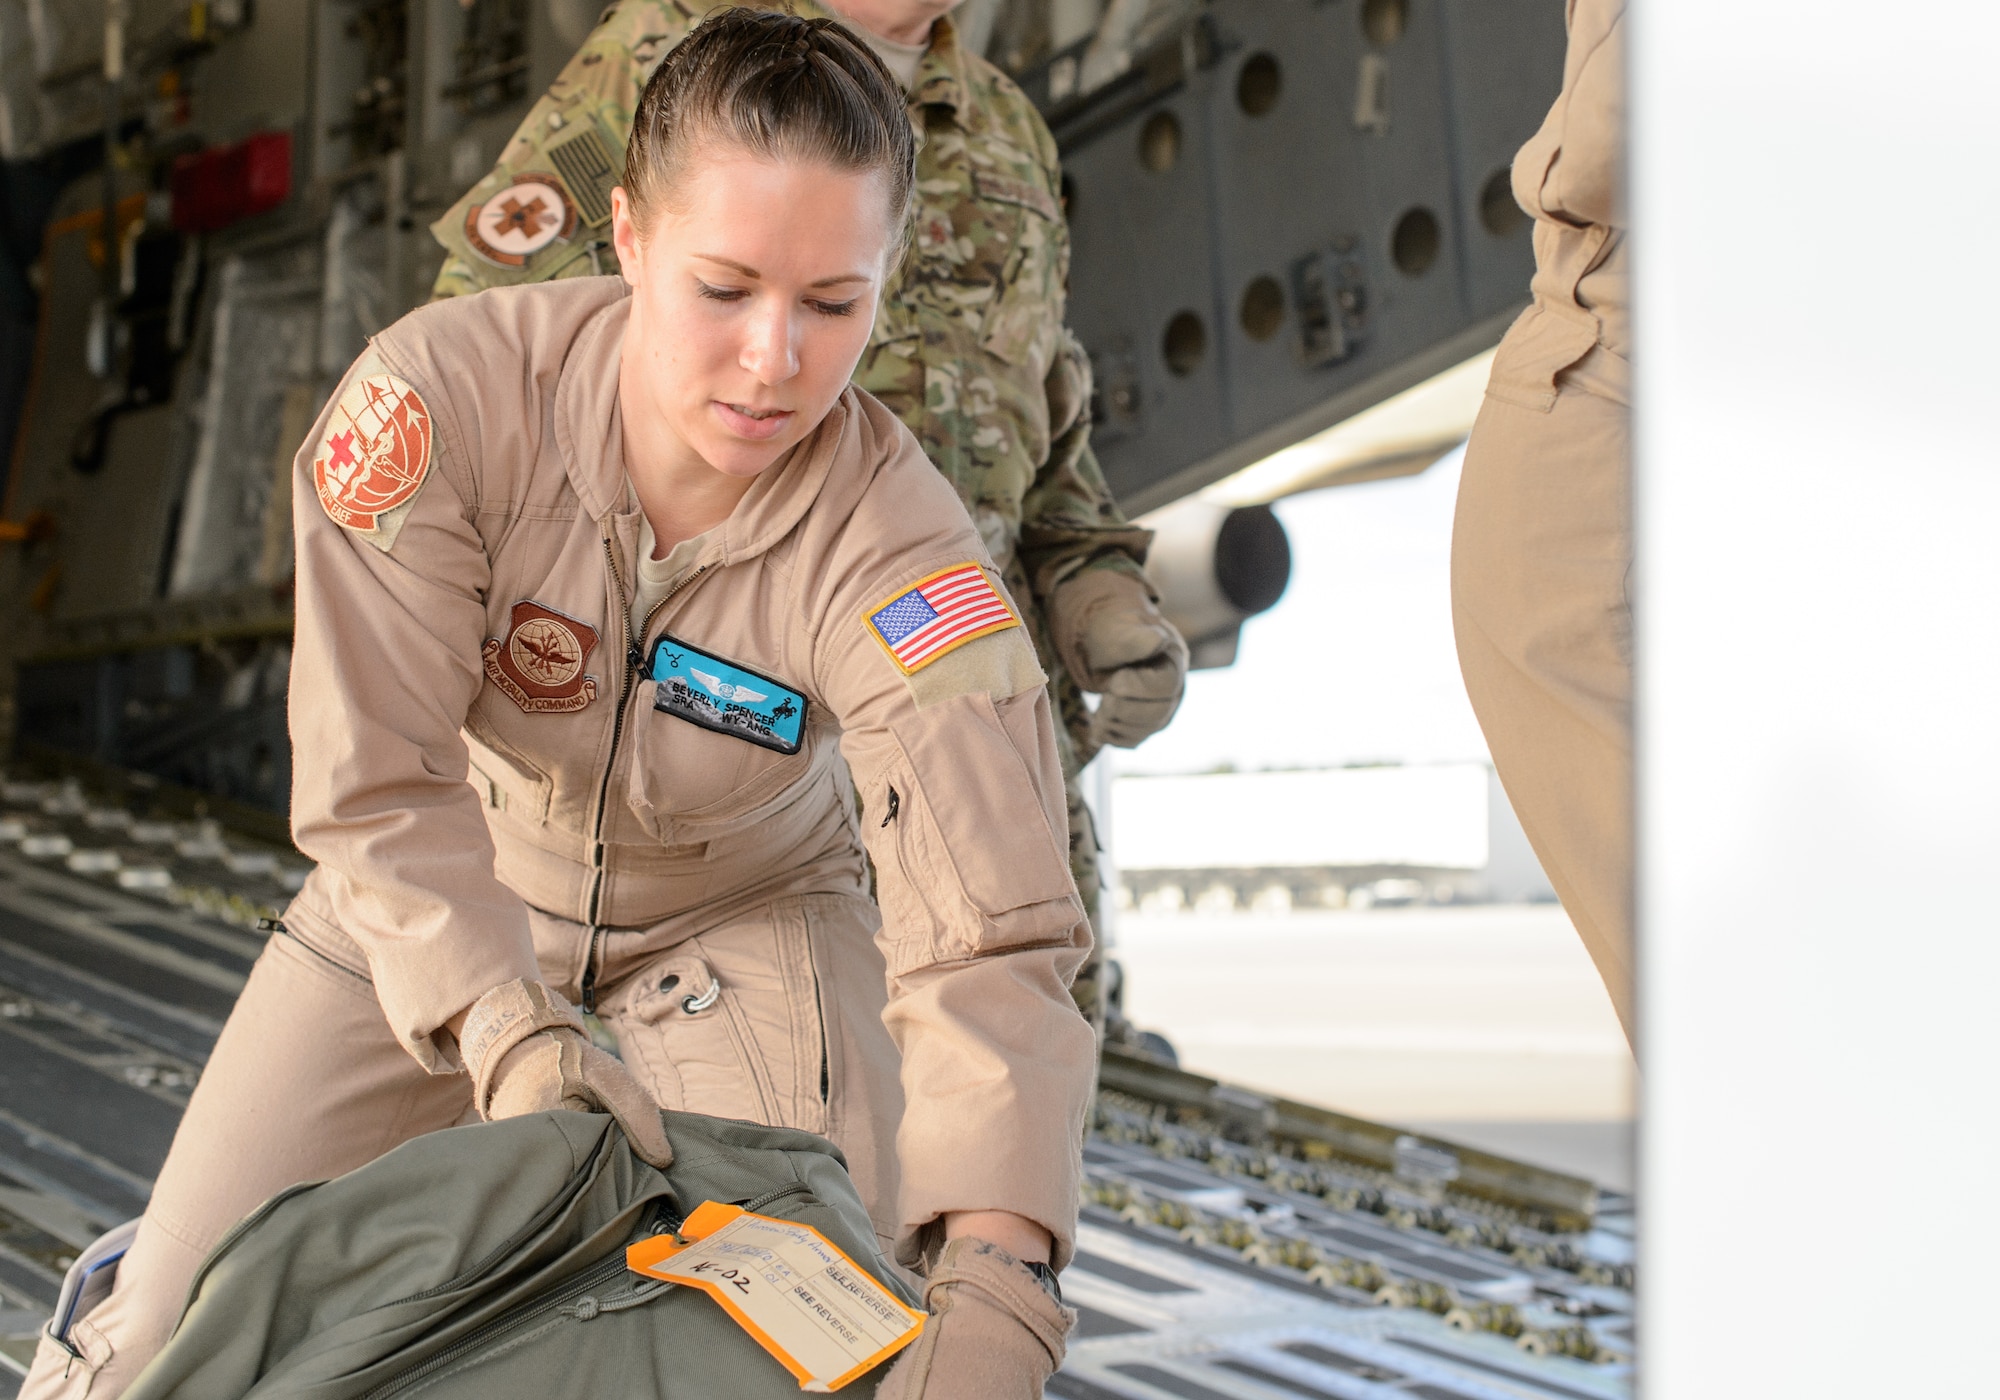 Senior Airman Beverly Spencer, 10th Expeditionary Aeromedical Evacuation Flight technician, loads a bag onto a C-17 Globemaster III Nov. 10, 2015, at Ramstein Air Base, Germany. Spencer and a crew of medical professionals departed Ramstein to retrieve and care for injured service members. (U.S. Air Force photo/Staff Sgt. Armando A. Schwier-Morales)